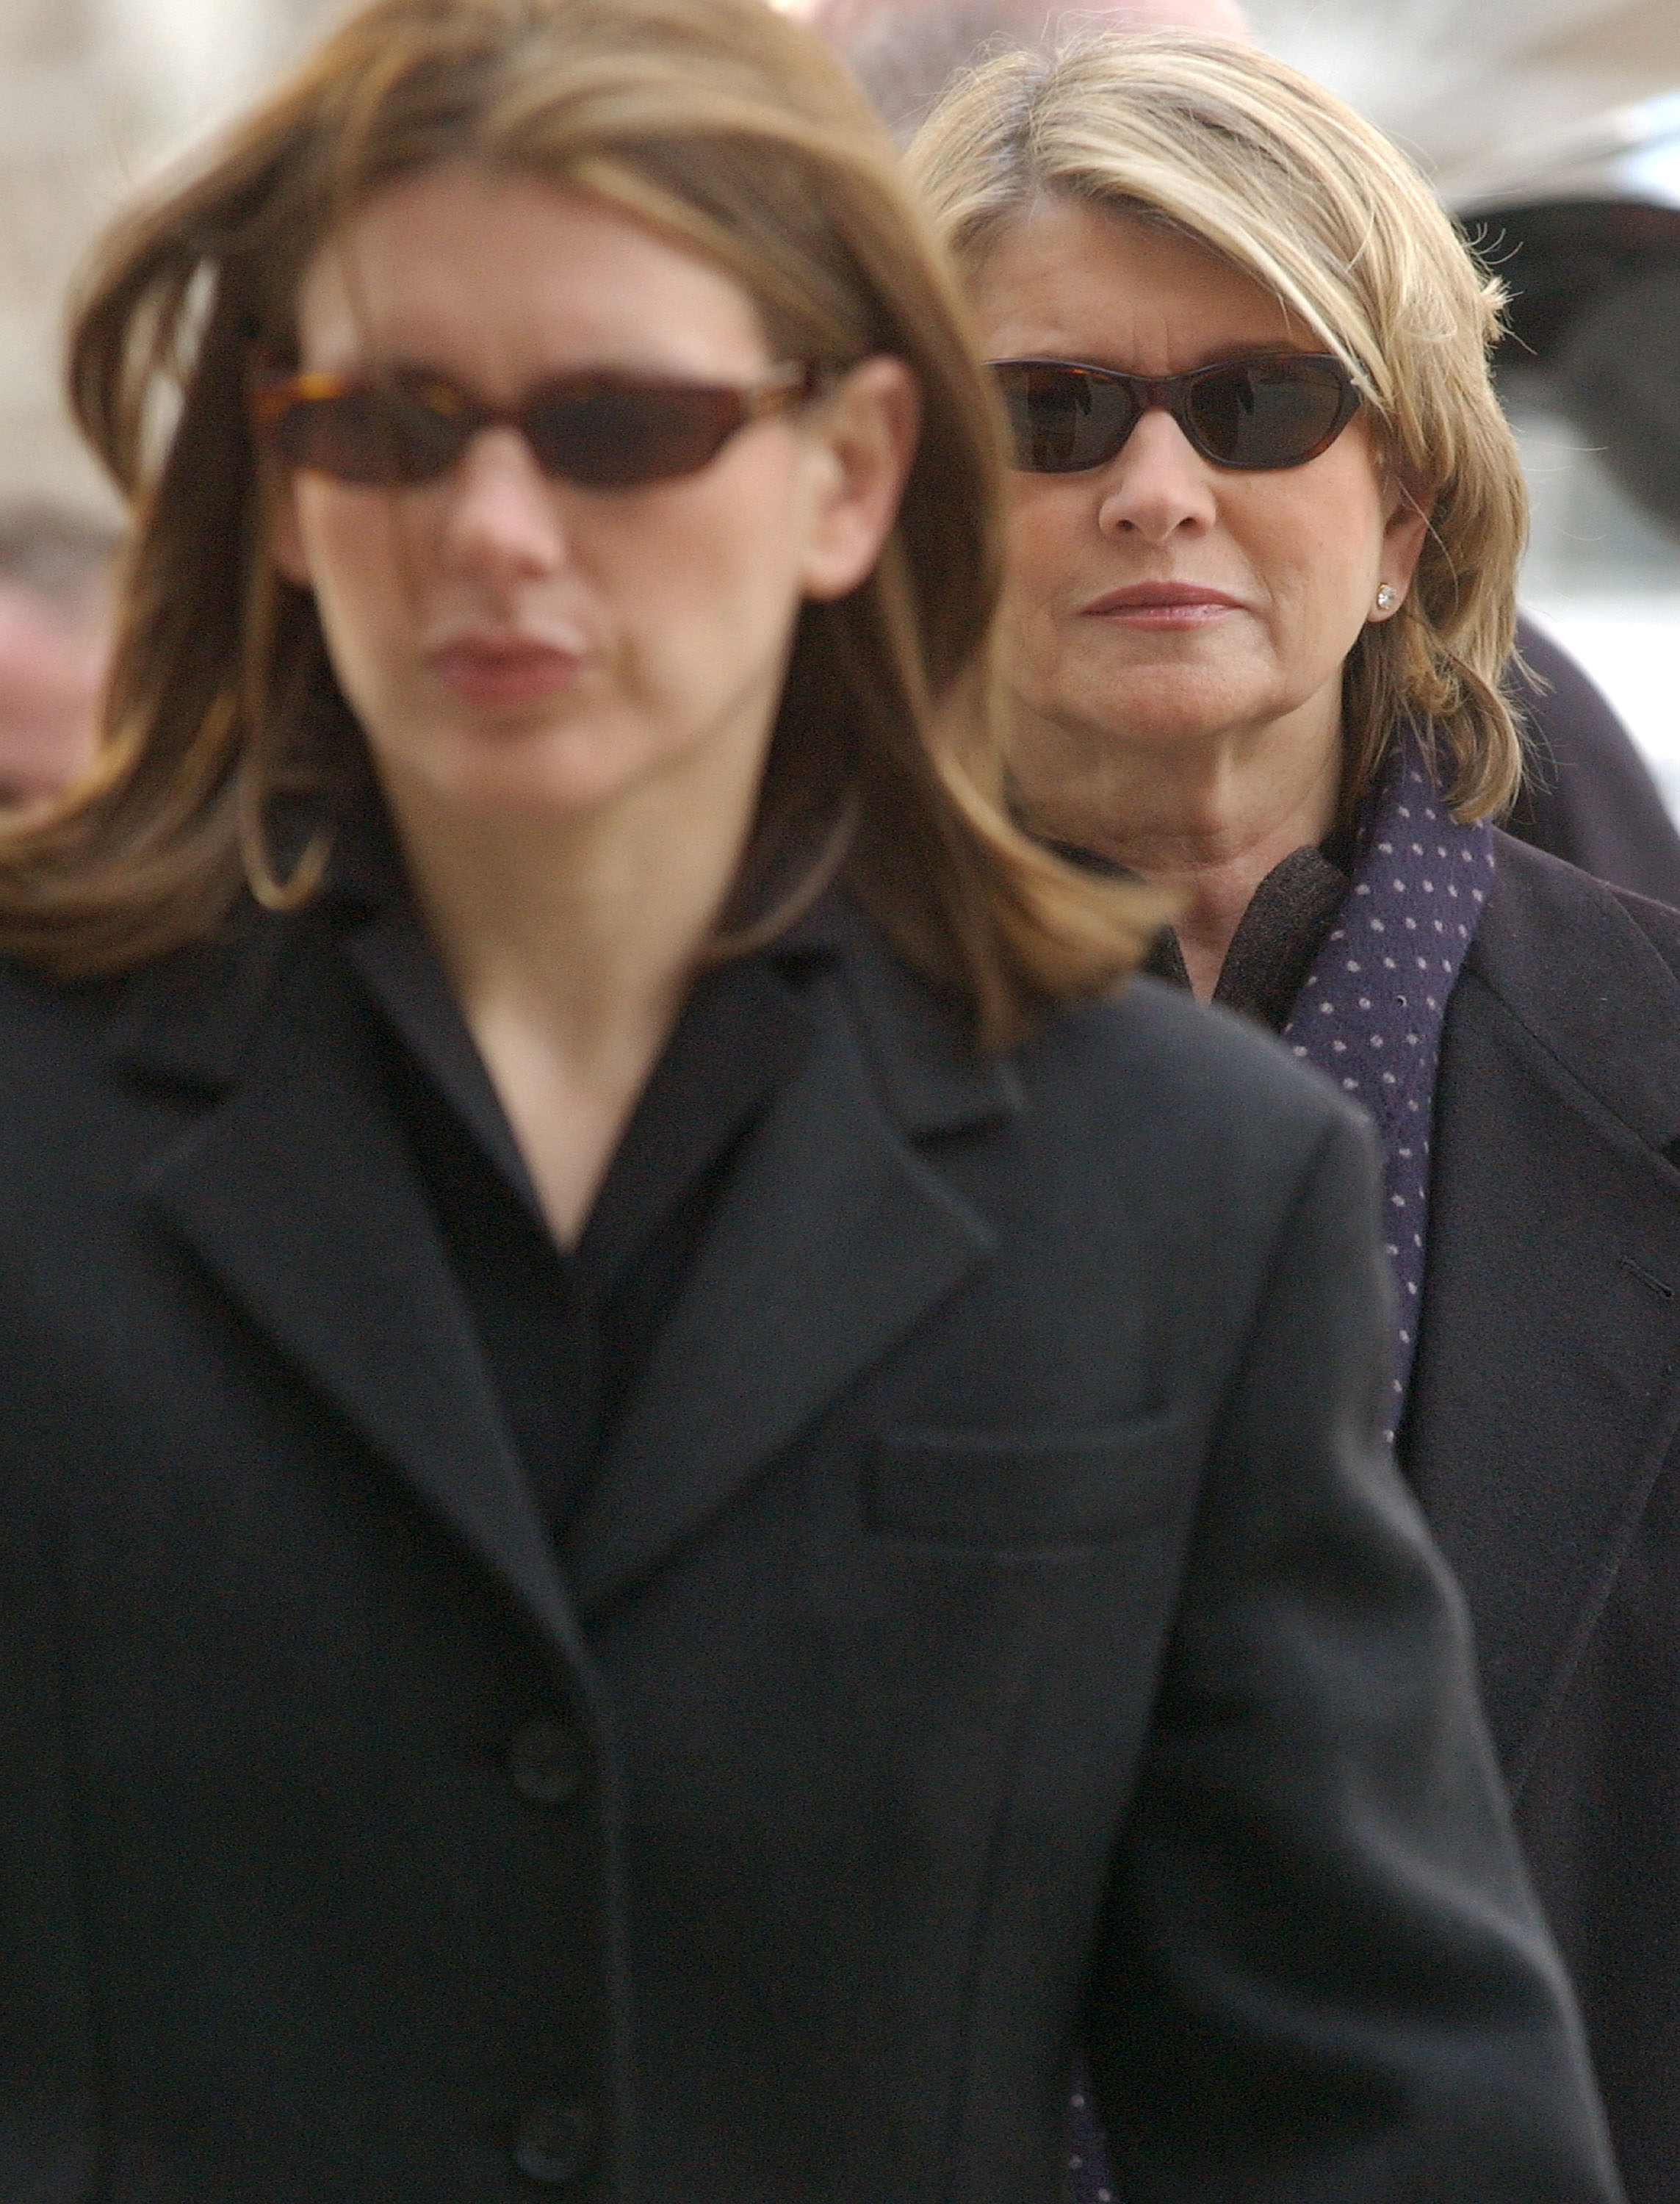 Alexis Stewart and Martha Stewart arrives at federal court on February 9, 2004, in New York City. | Source: Getty Images